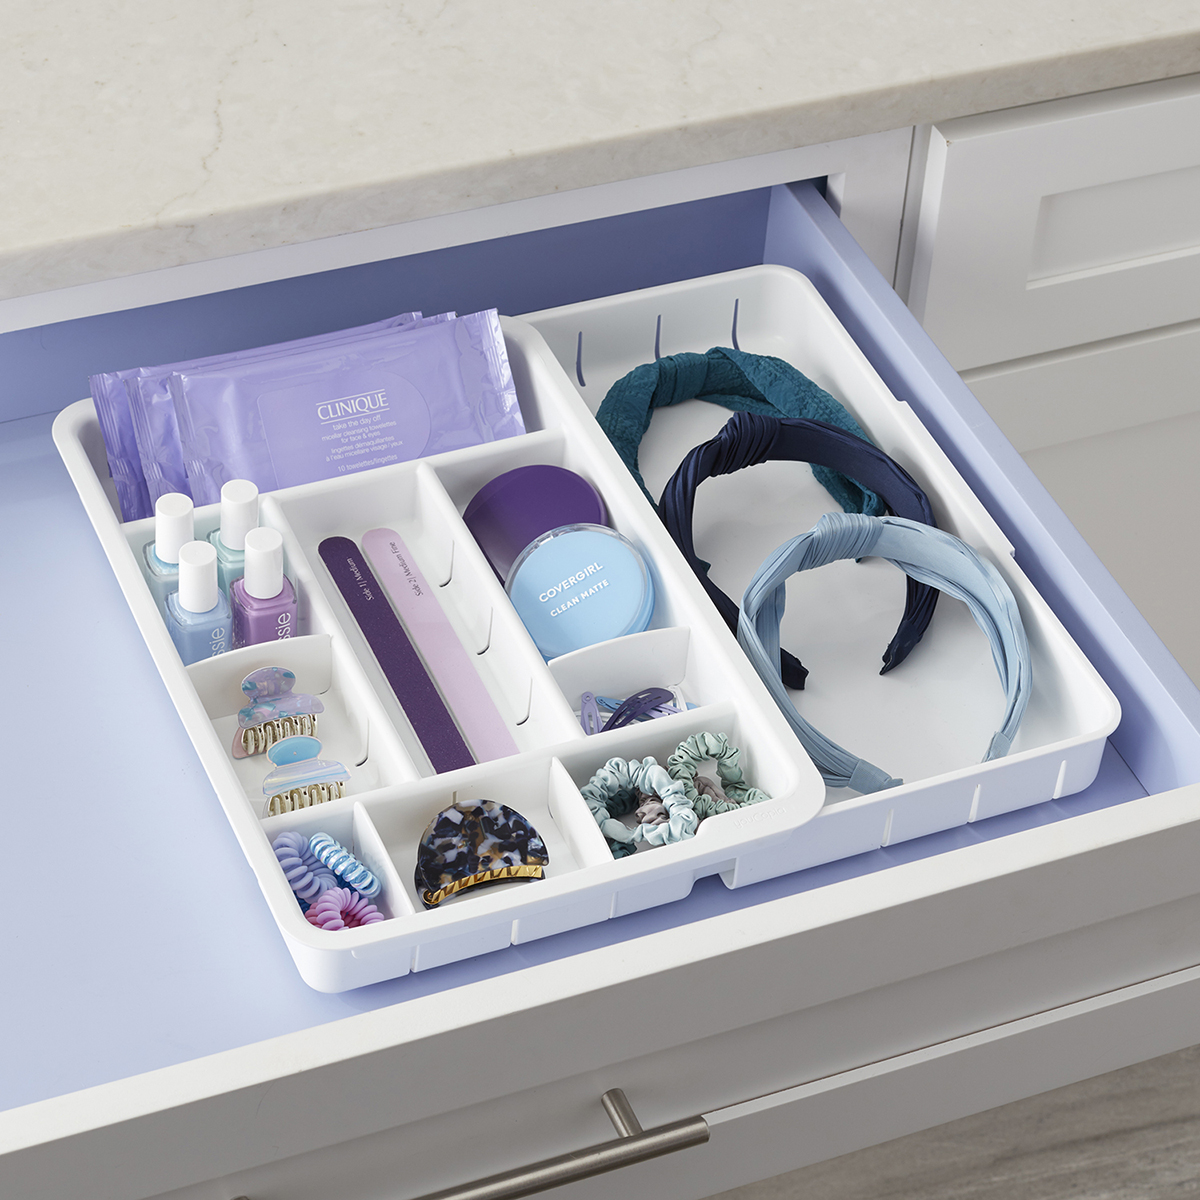 https://www.containerstore.com/catalogimages/401749/10083172-YouCopia-Expandable-Organiz.jpg